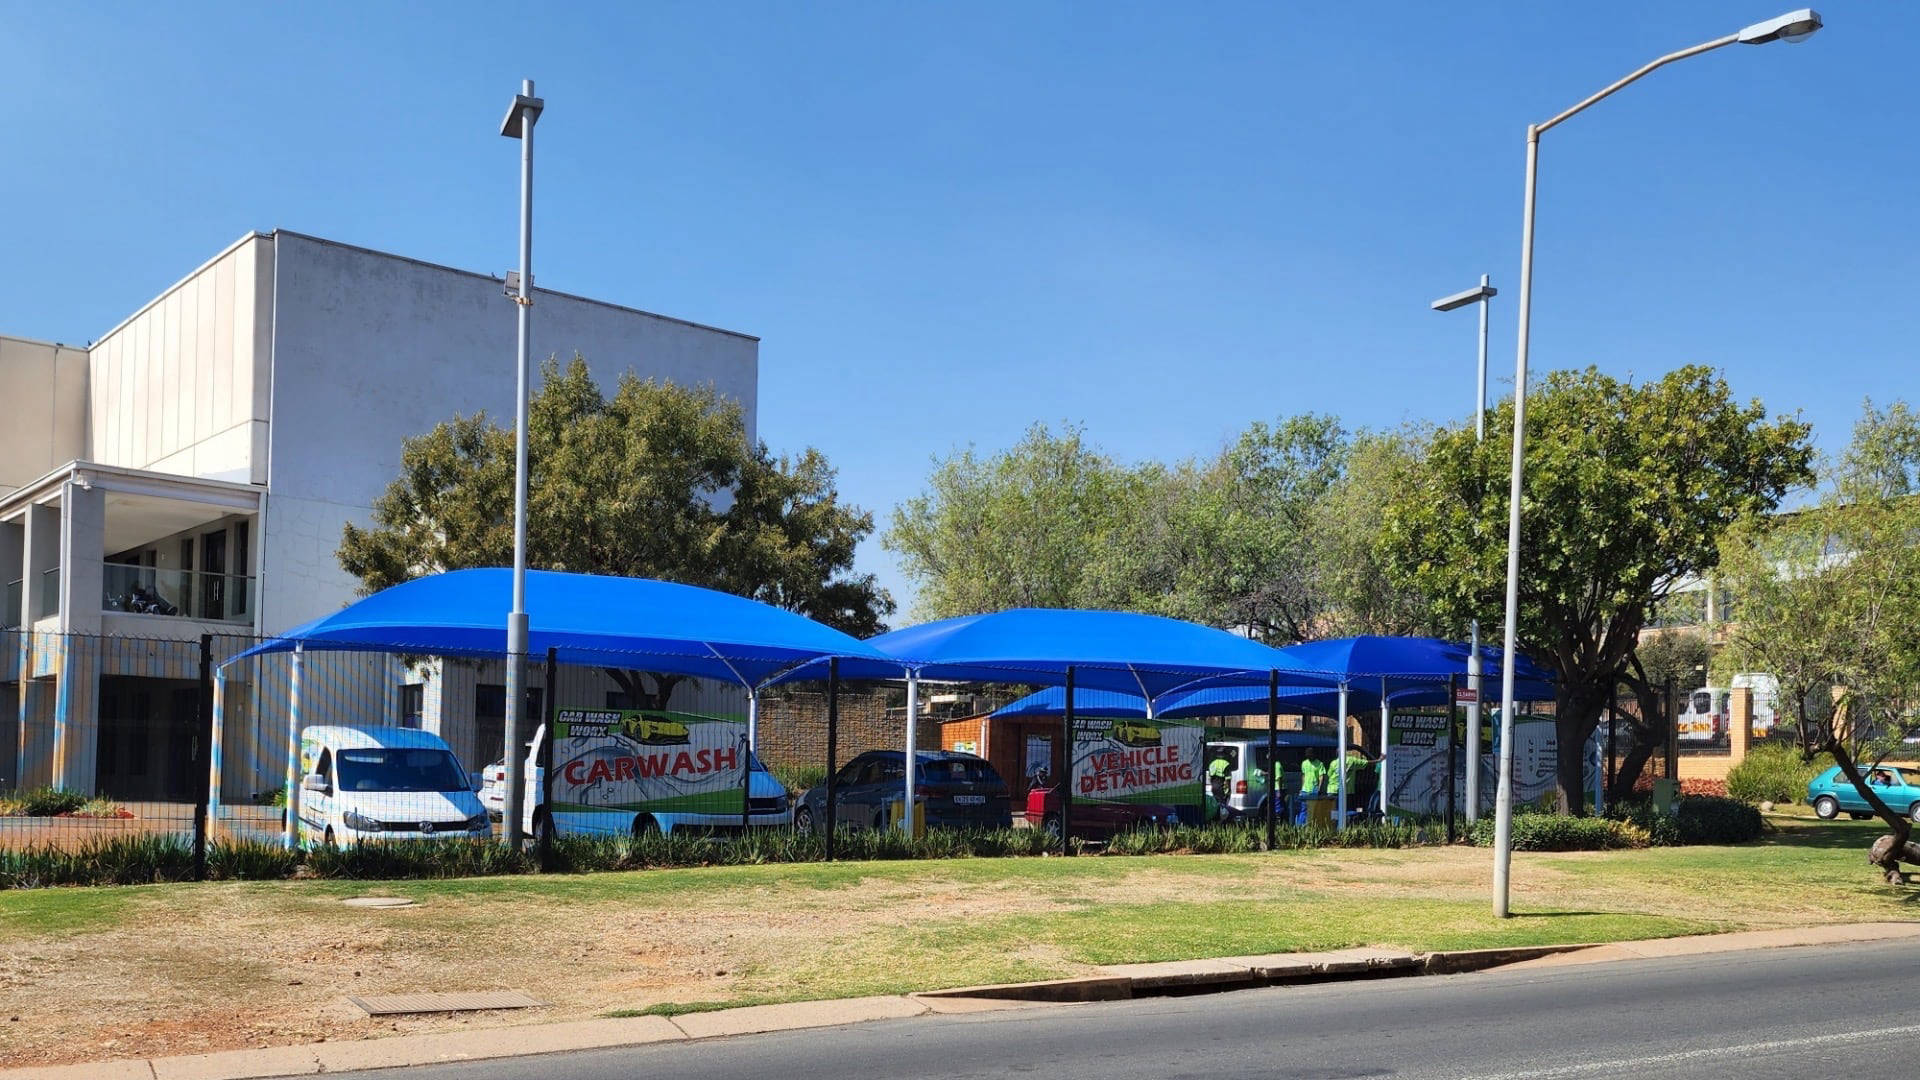 Castle Walk Shopping Centre CarWash Worx Pretoria Branch, Car Wash Franchises Available, CarWash Worx Head Office, Join The Leading Car Wash Franchising Group, Start Your Own Successful Car Wash Business Now